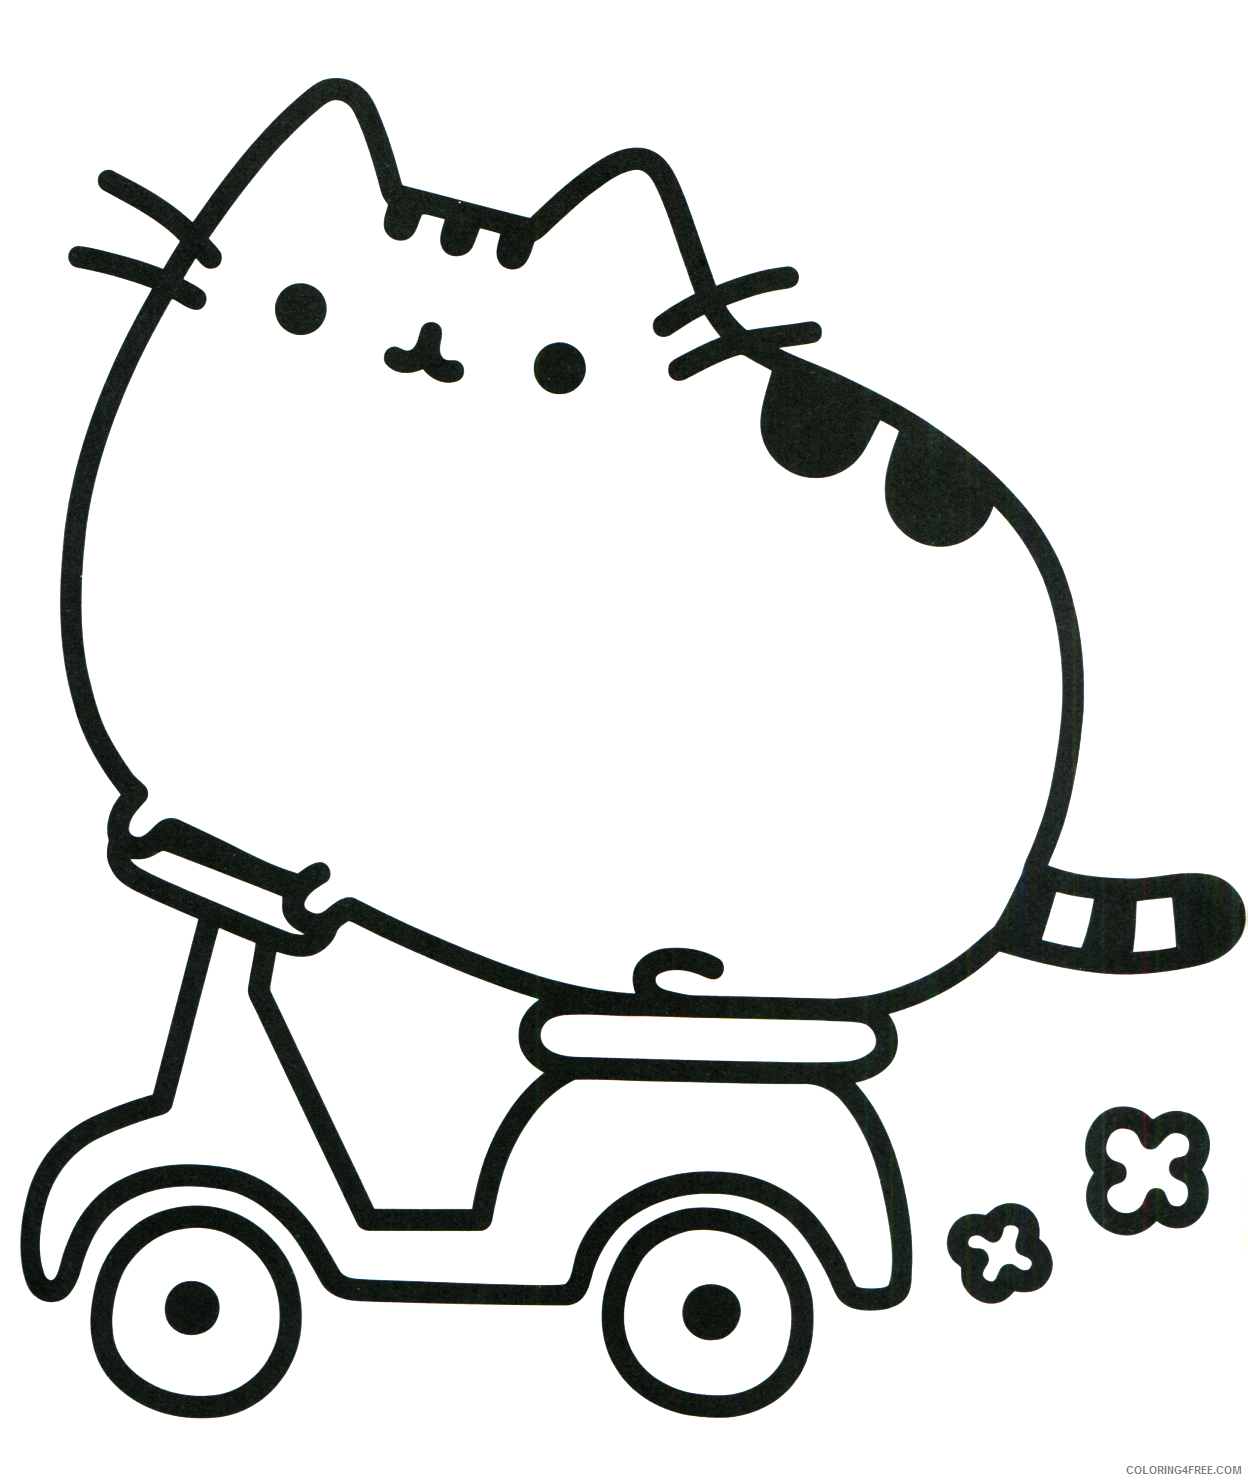 Pusheen Coloring Pages Cartoons Pusheen Cat on a Motorbike Printable 2020 5209 Coloring4free